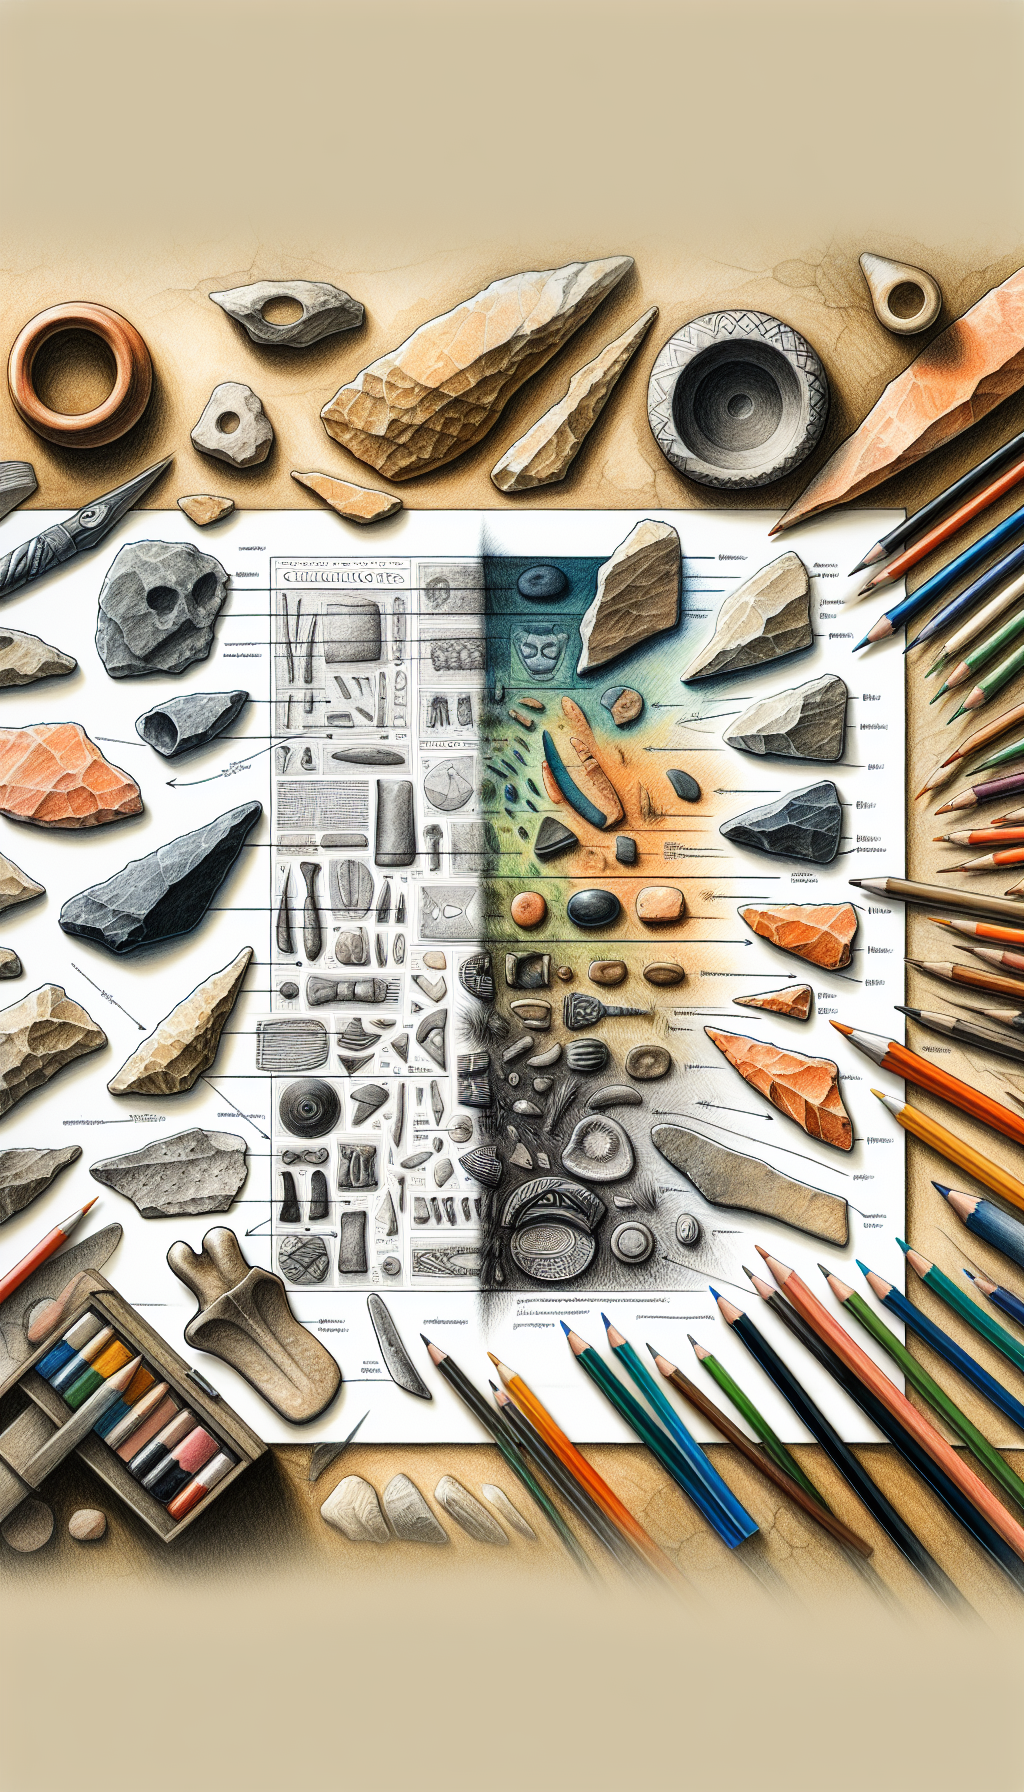 An illustration depicts an archaeologist's worktable, layered in translucent, watercolor textures. Half of the table showcases finely-detailed, sketched stone tools and pottery shards, radiating lines to annotations revealing their functions. The other half presents vibrant, colored-pencil depictions of the whole artifacts, matched with their cultural symbols, aiding in identification—a visual bridge between past utility and present discovery of Native American relics.